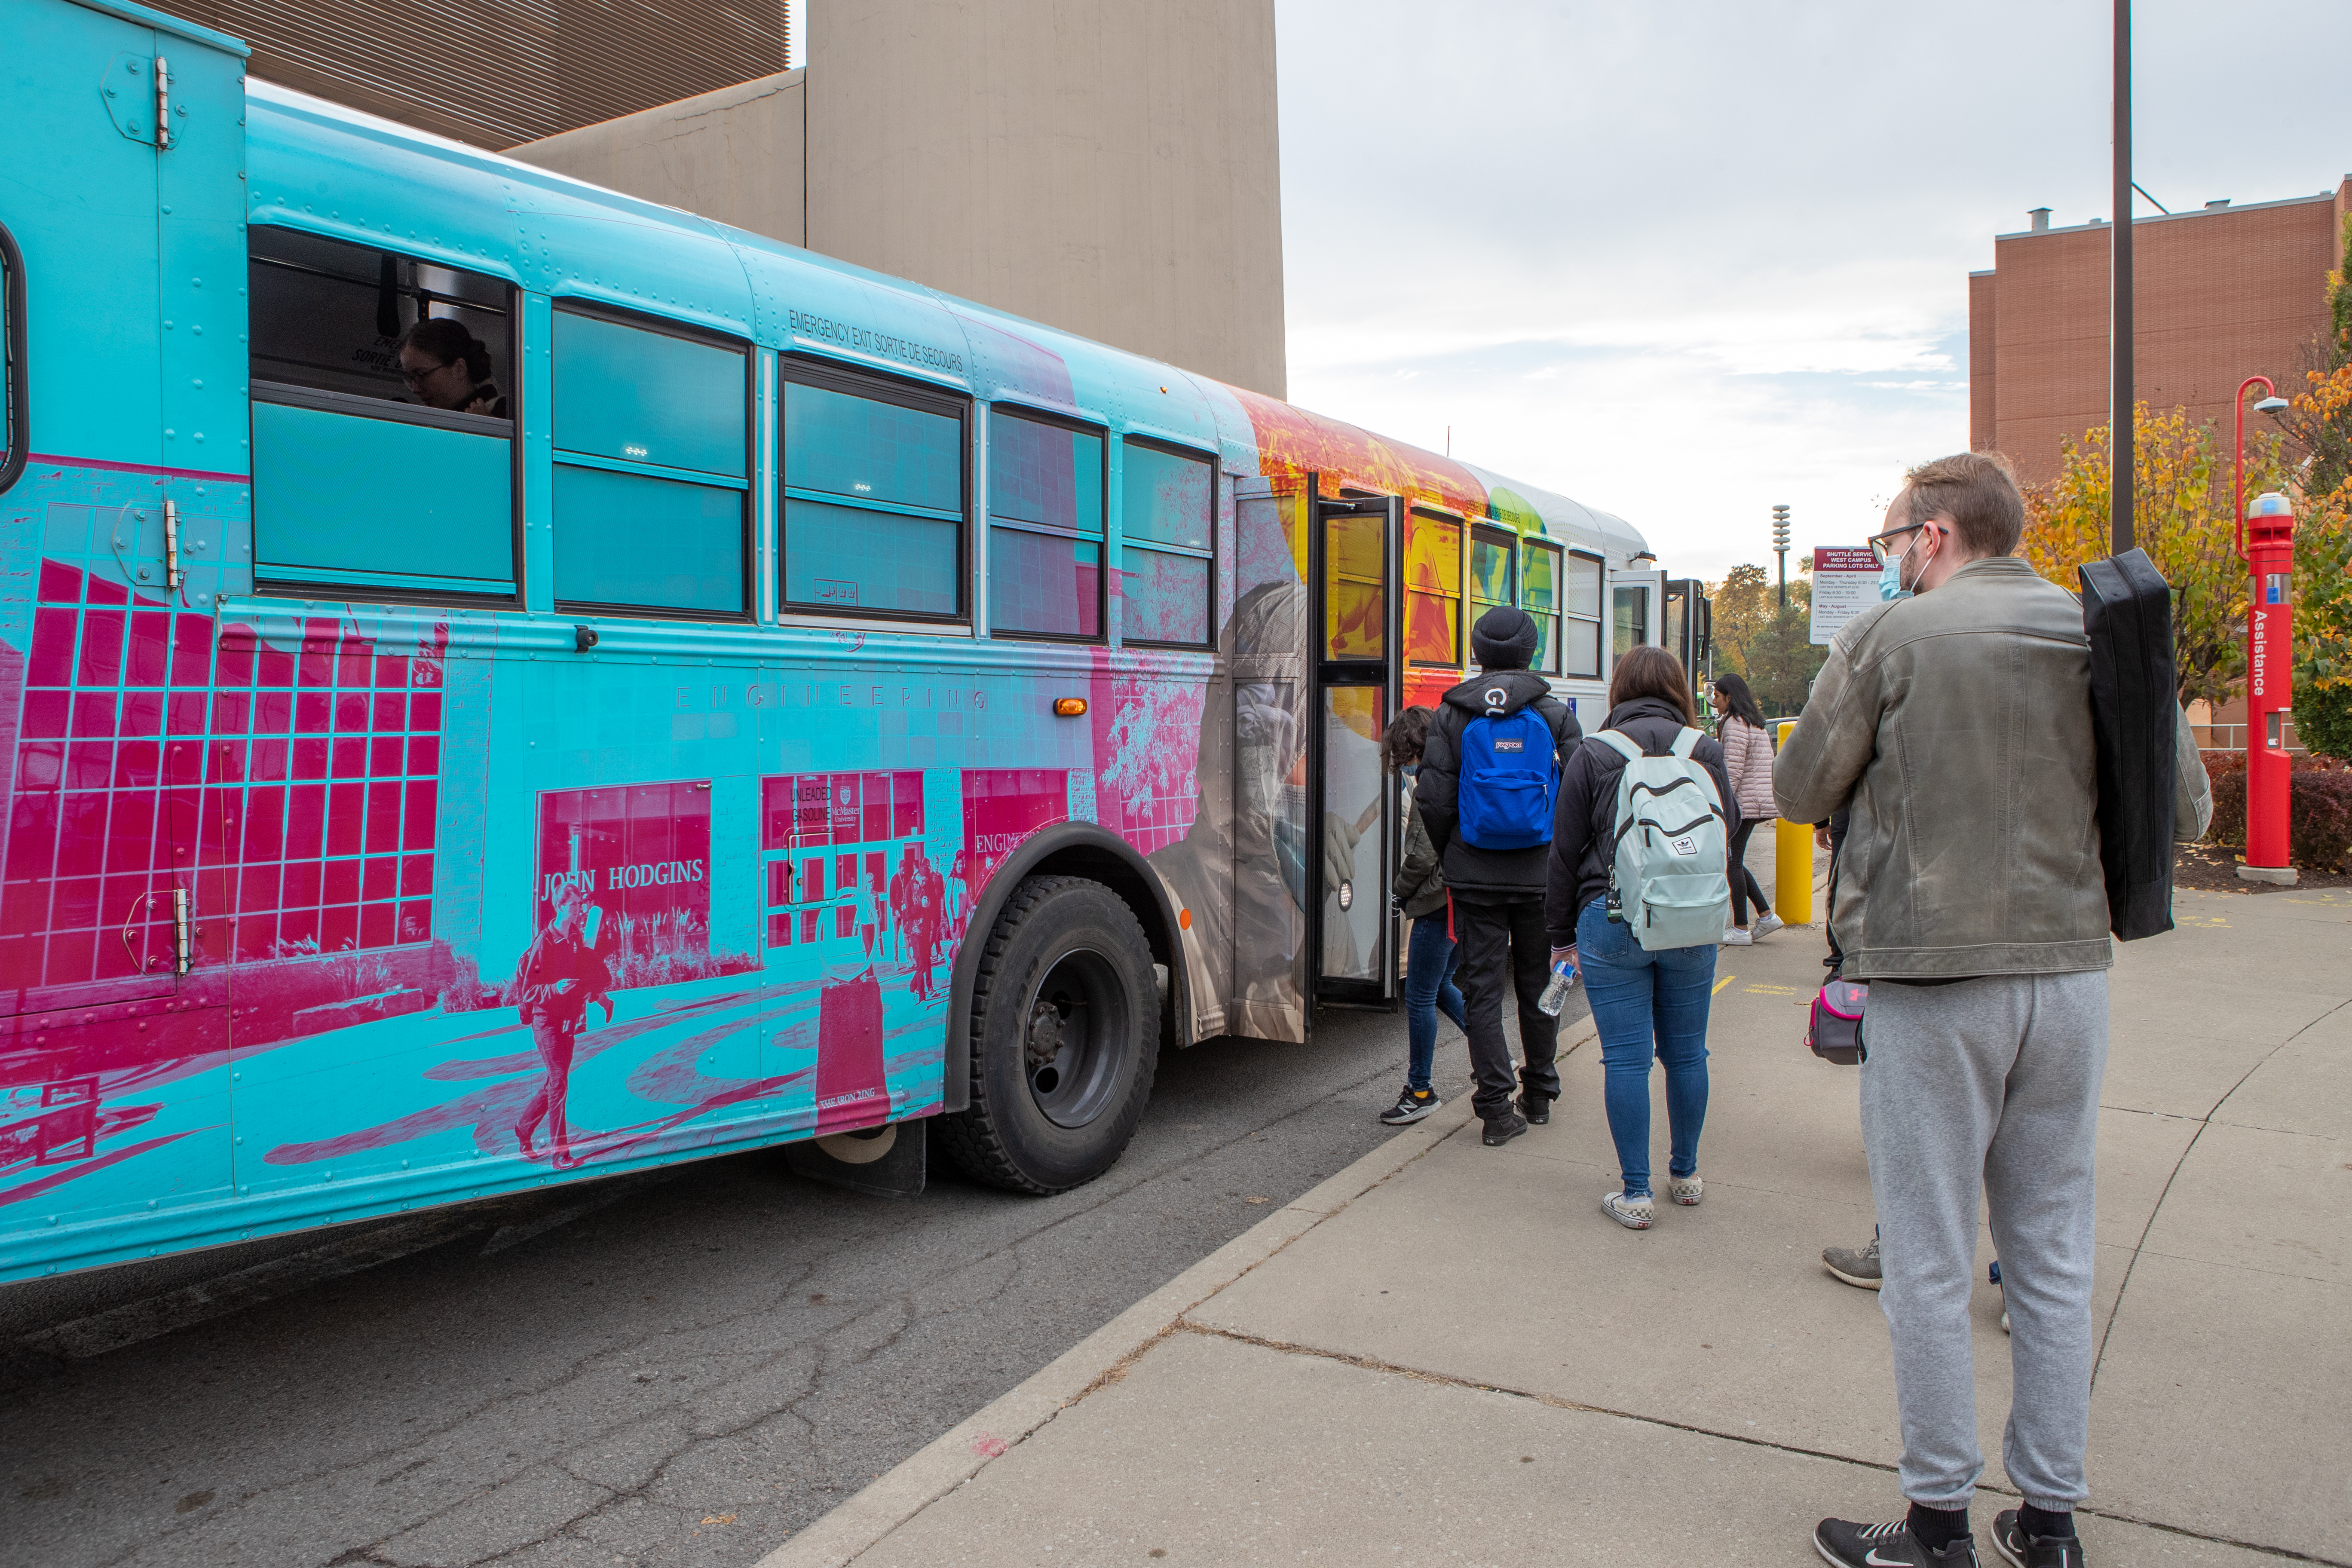 People boarding the McMaster shuttle bus for on-site